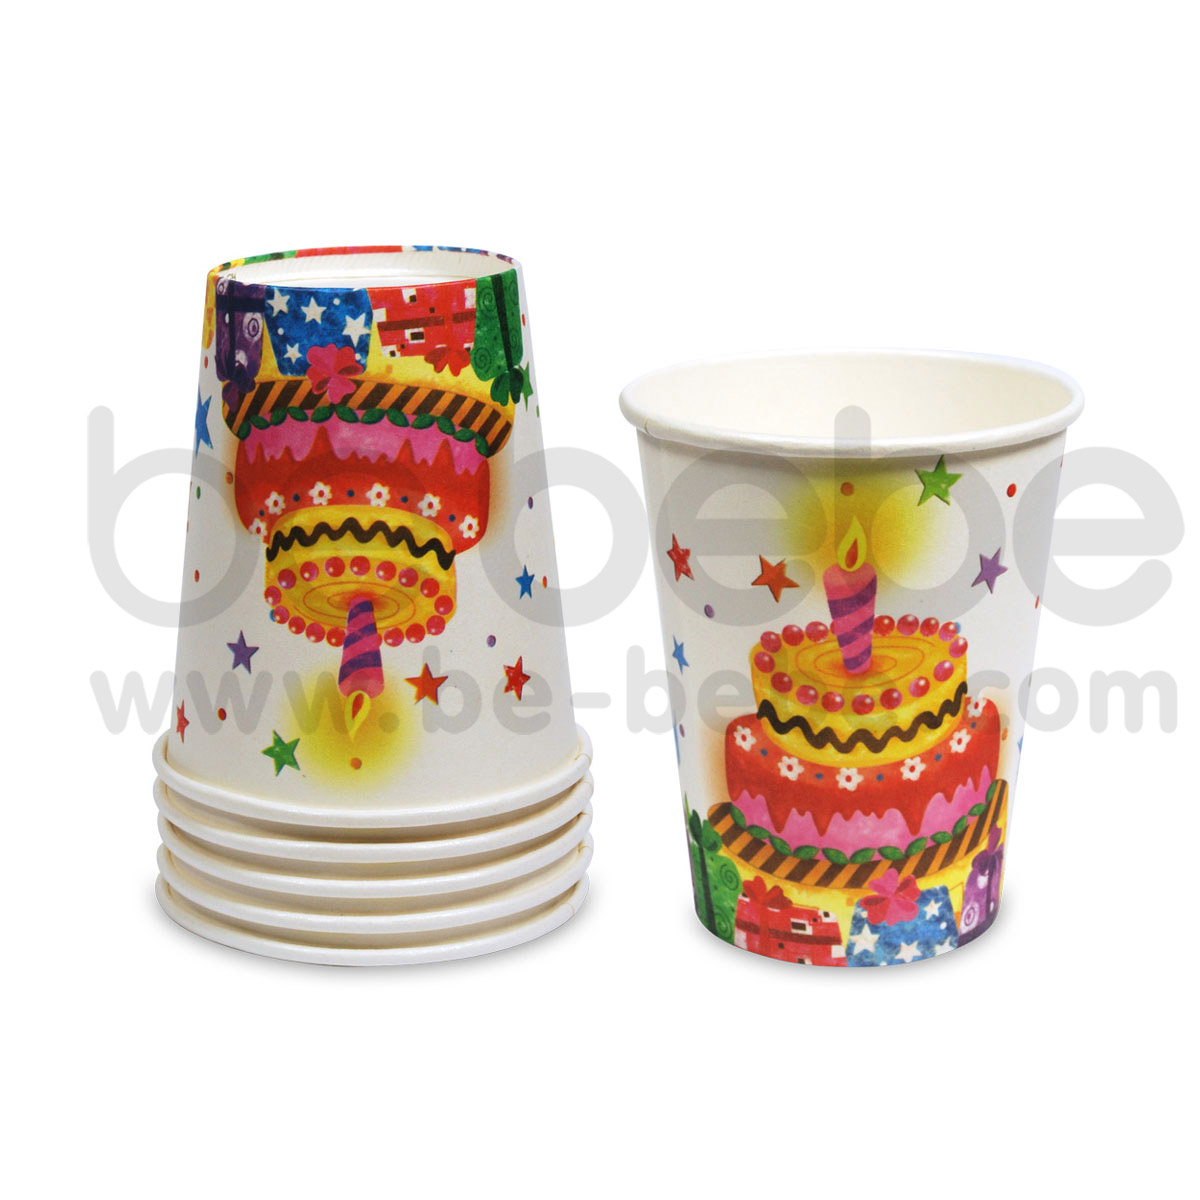 PARTY BUG : Paper cup 9 Oz., 12 Packs